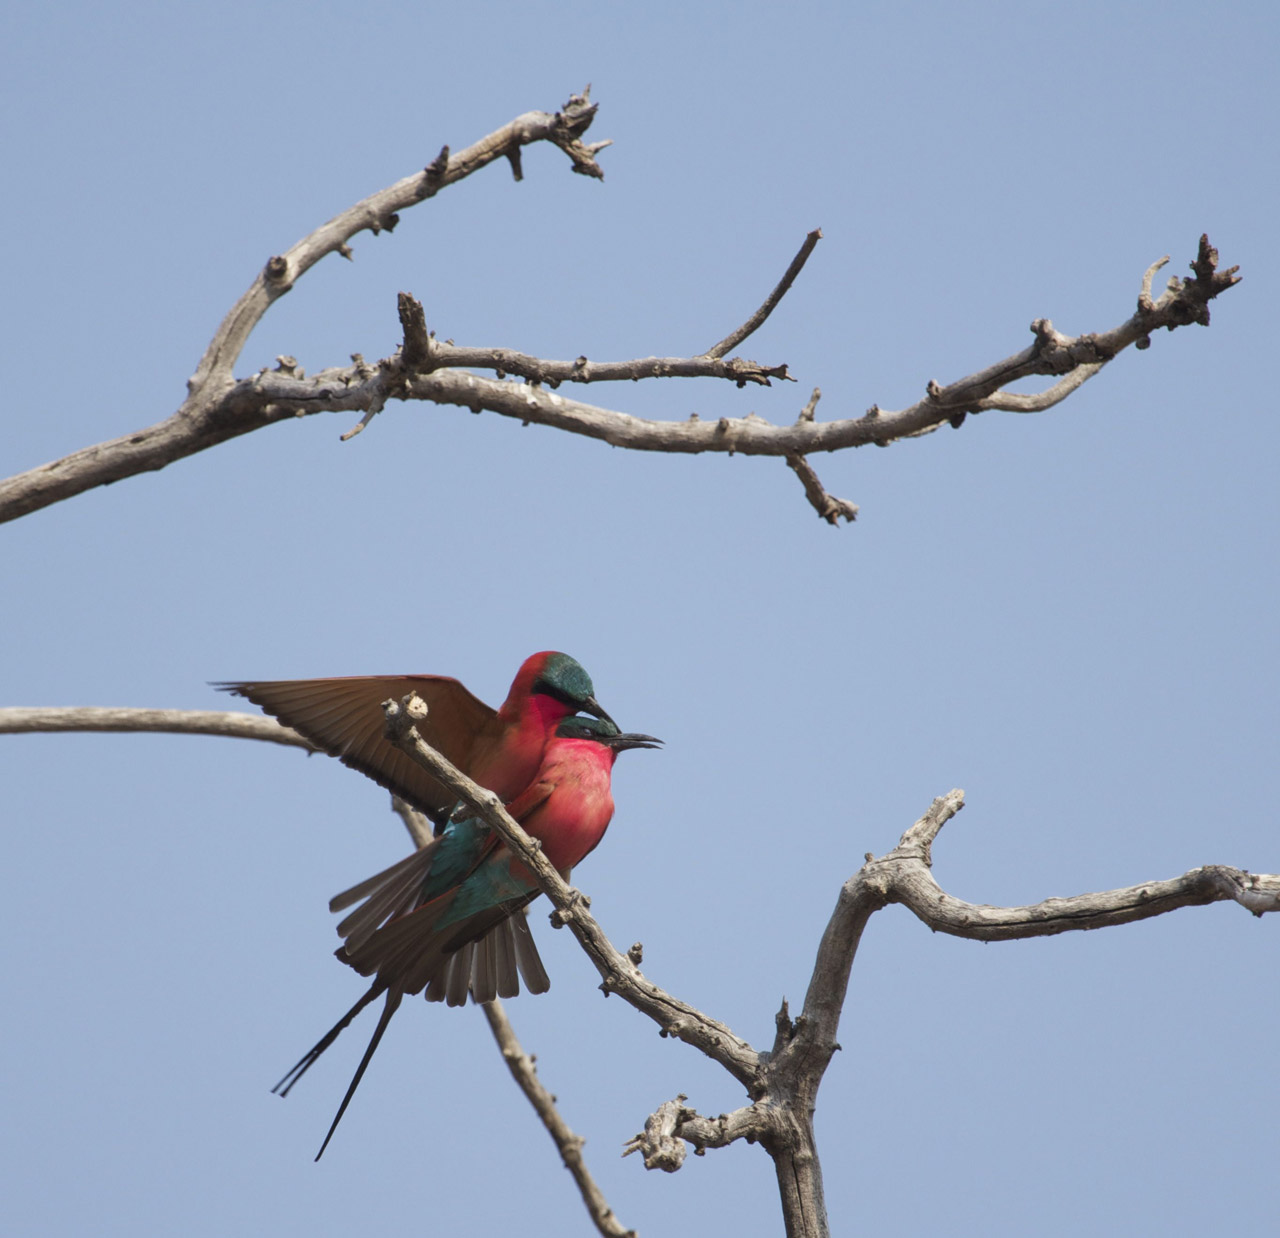 Carmine bee-eaters mating in early spring along the Chobe, where huge flocks congregate from September